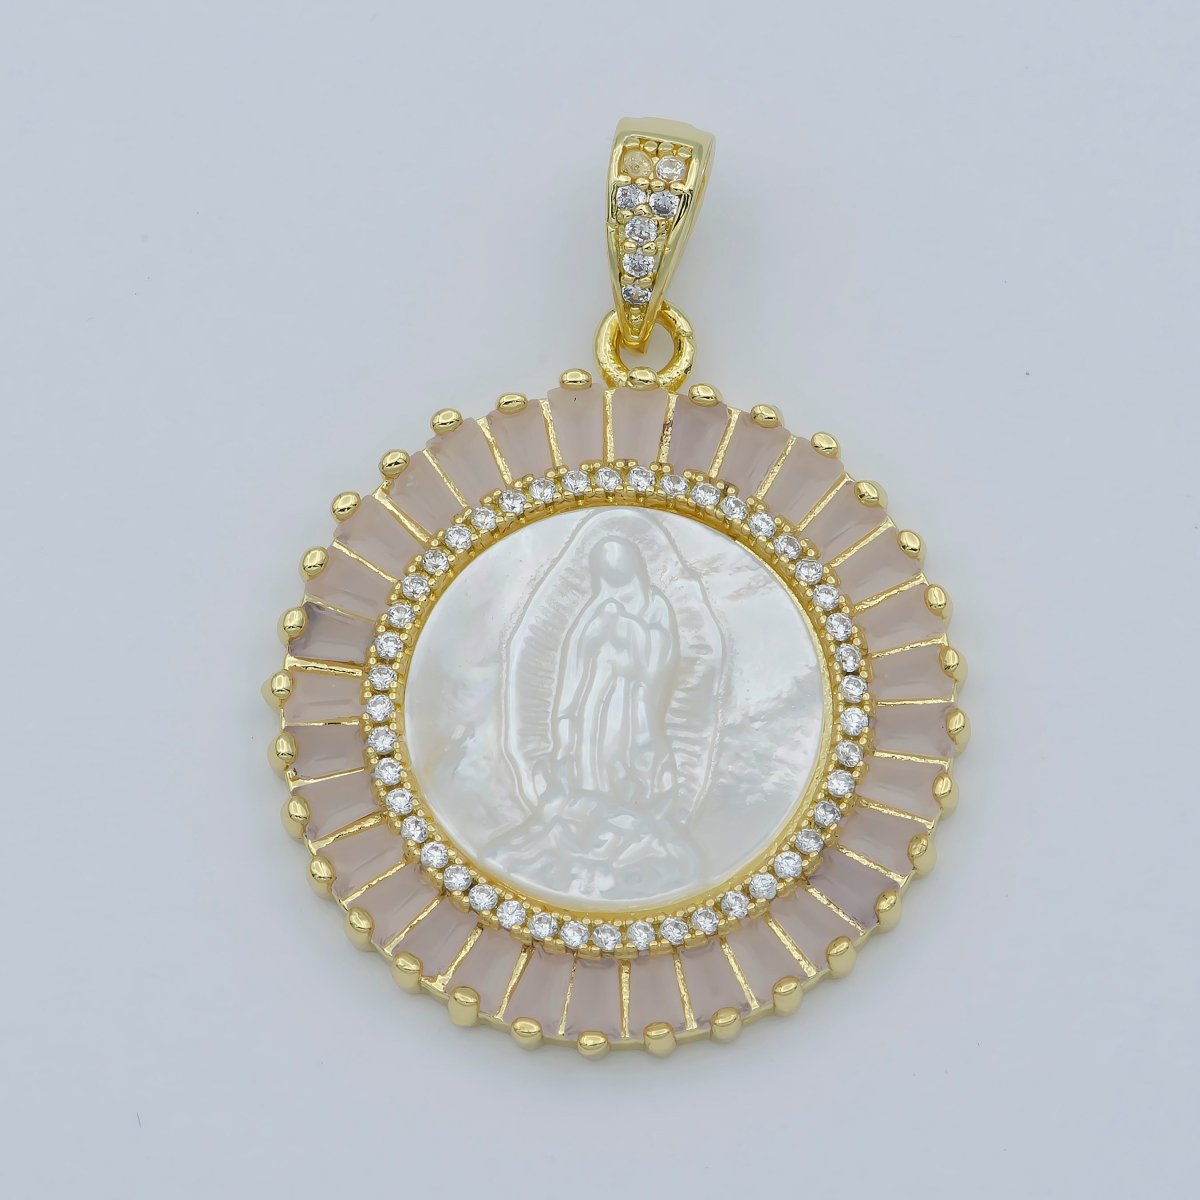 Gold Filled Virgin Mary Pendant Pearl Lady Guadalupe Medallion Charm Necklace Pink Cubic Micro Pave Cz for Religious jewelry making supply N-1407 I-109 - DLUXCA